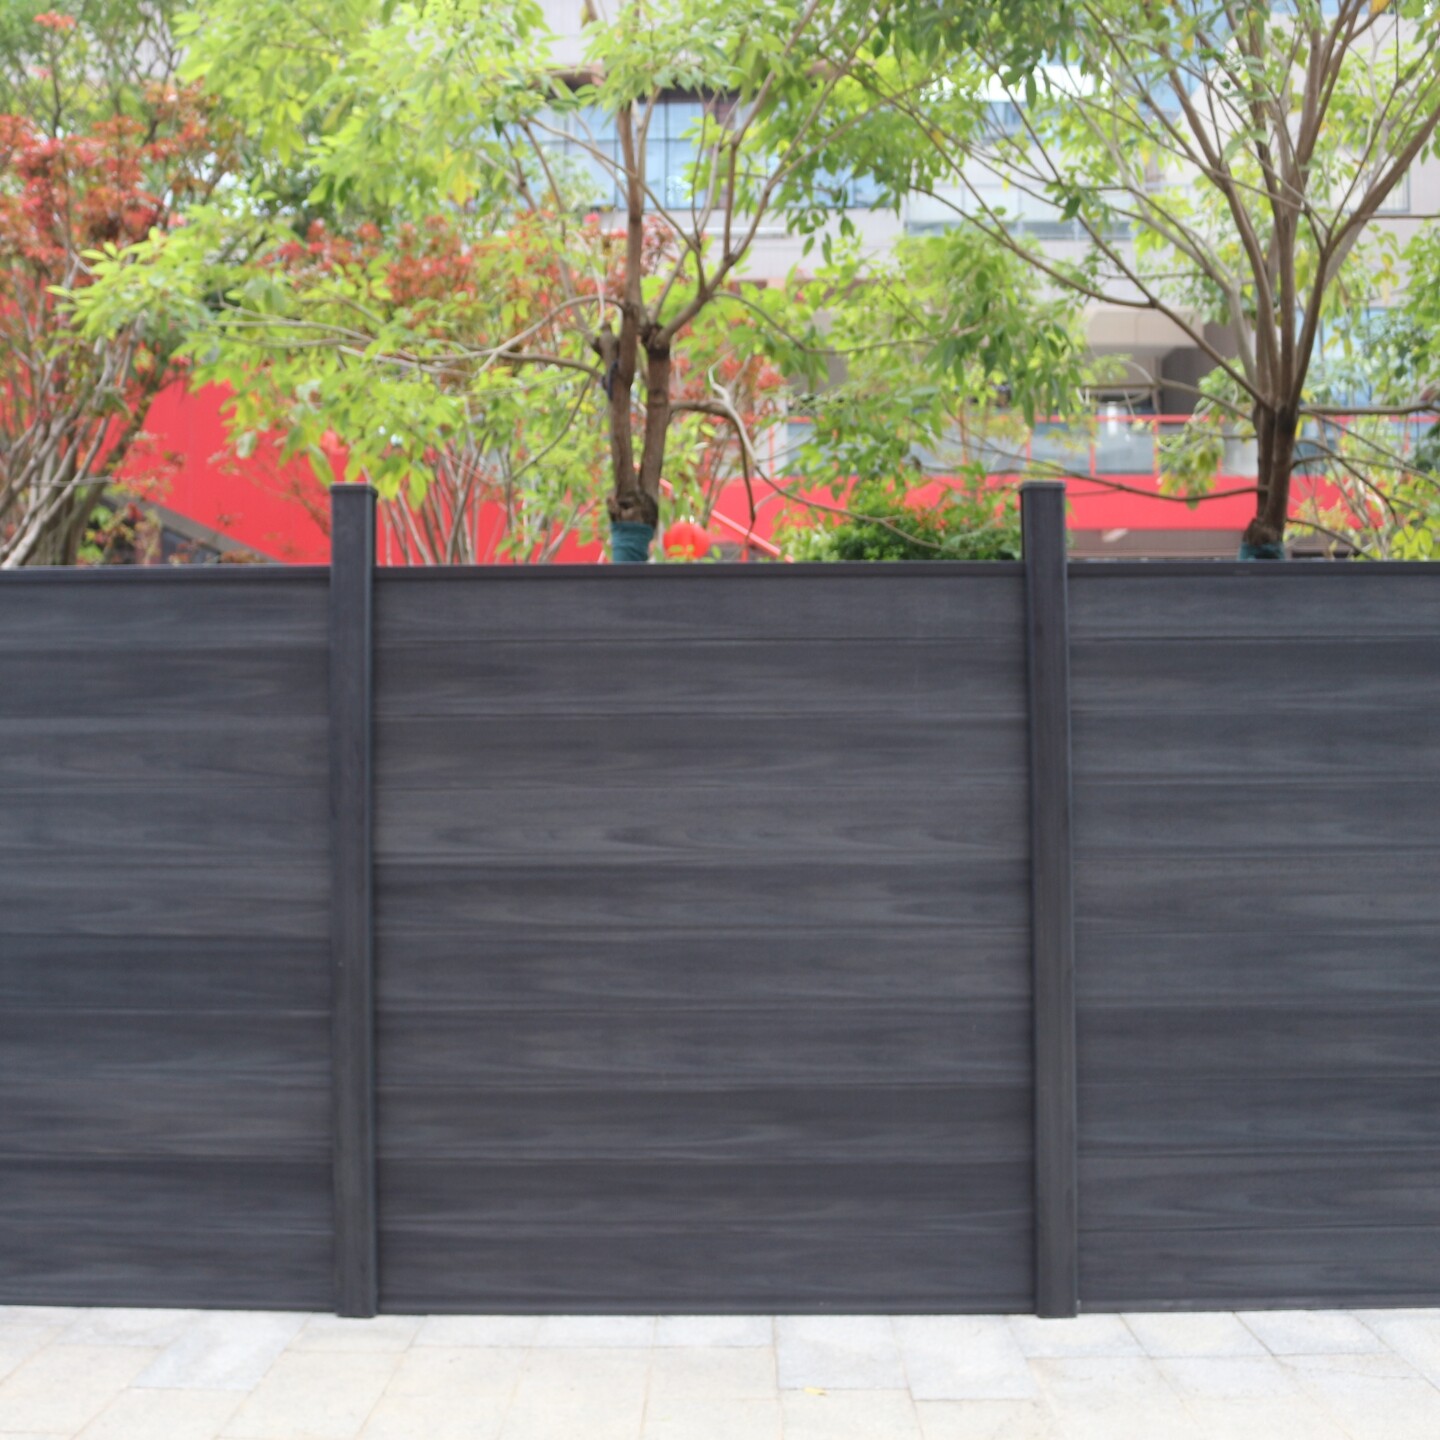 wpc privacy fencing manufacturers, wpc privacy fencing quotes, wpc privacy fencing supplier, wholesale wpc privacy fence panels supplier, wholesale wpc privacy fence screen supplier